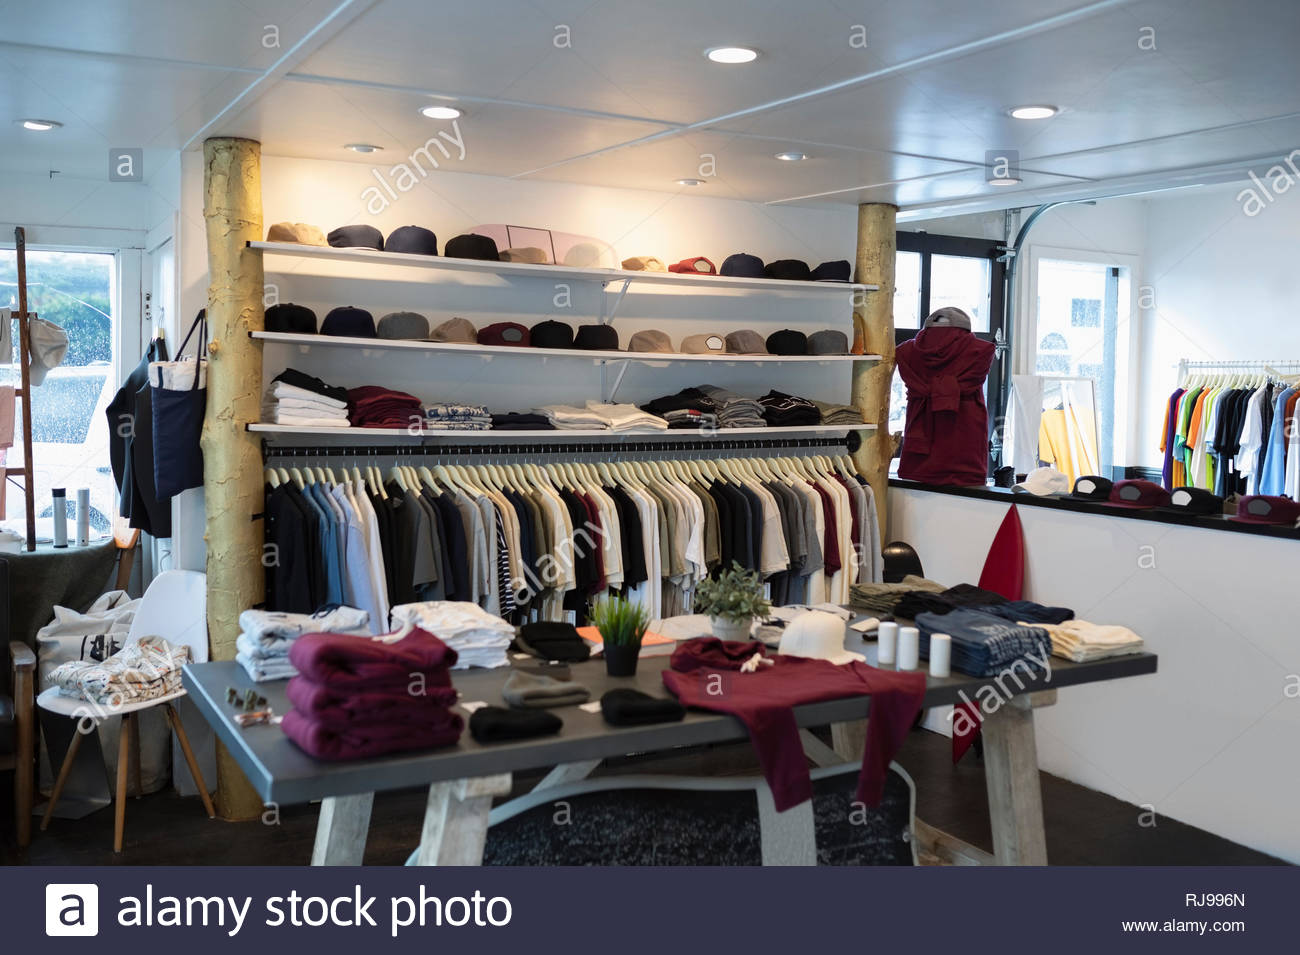 Merchandise on display in menswear clothing shop Stock Photo